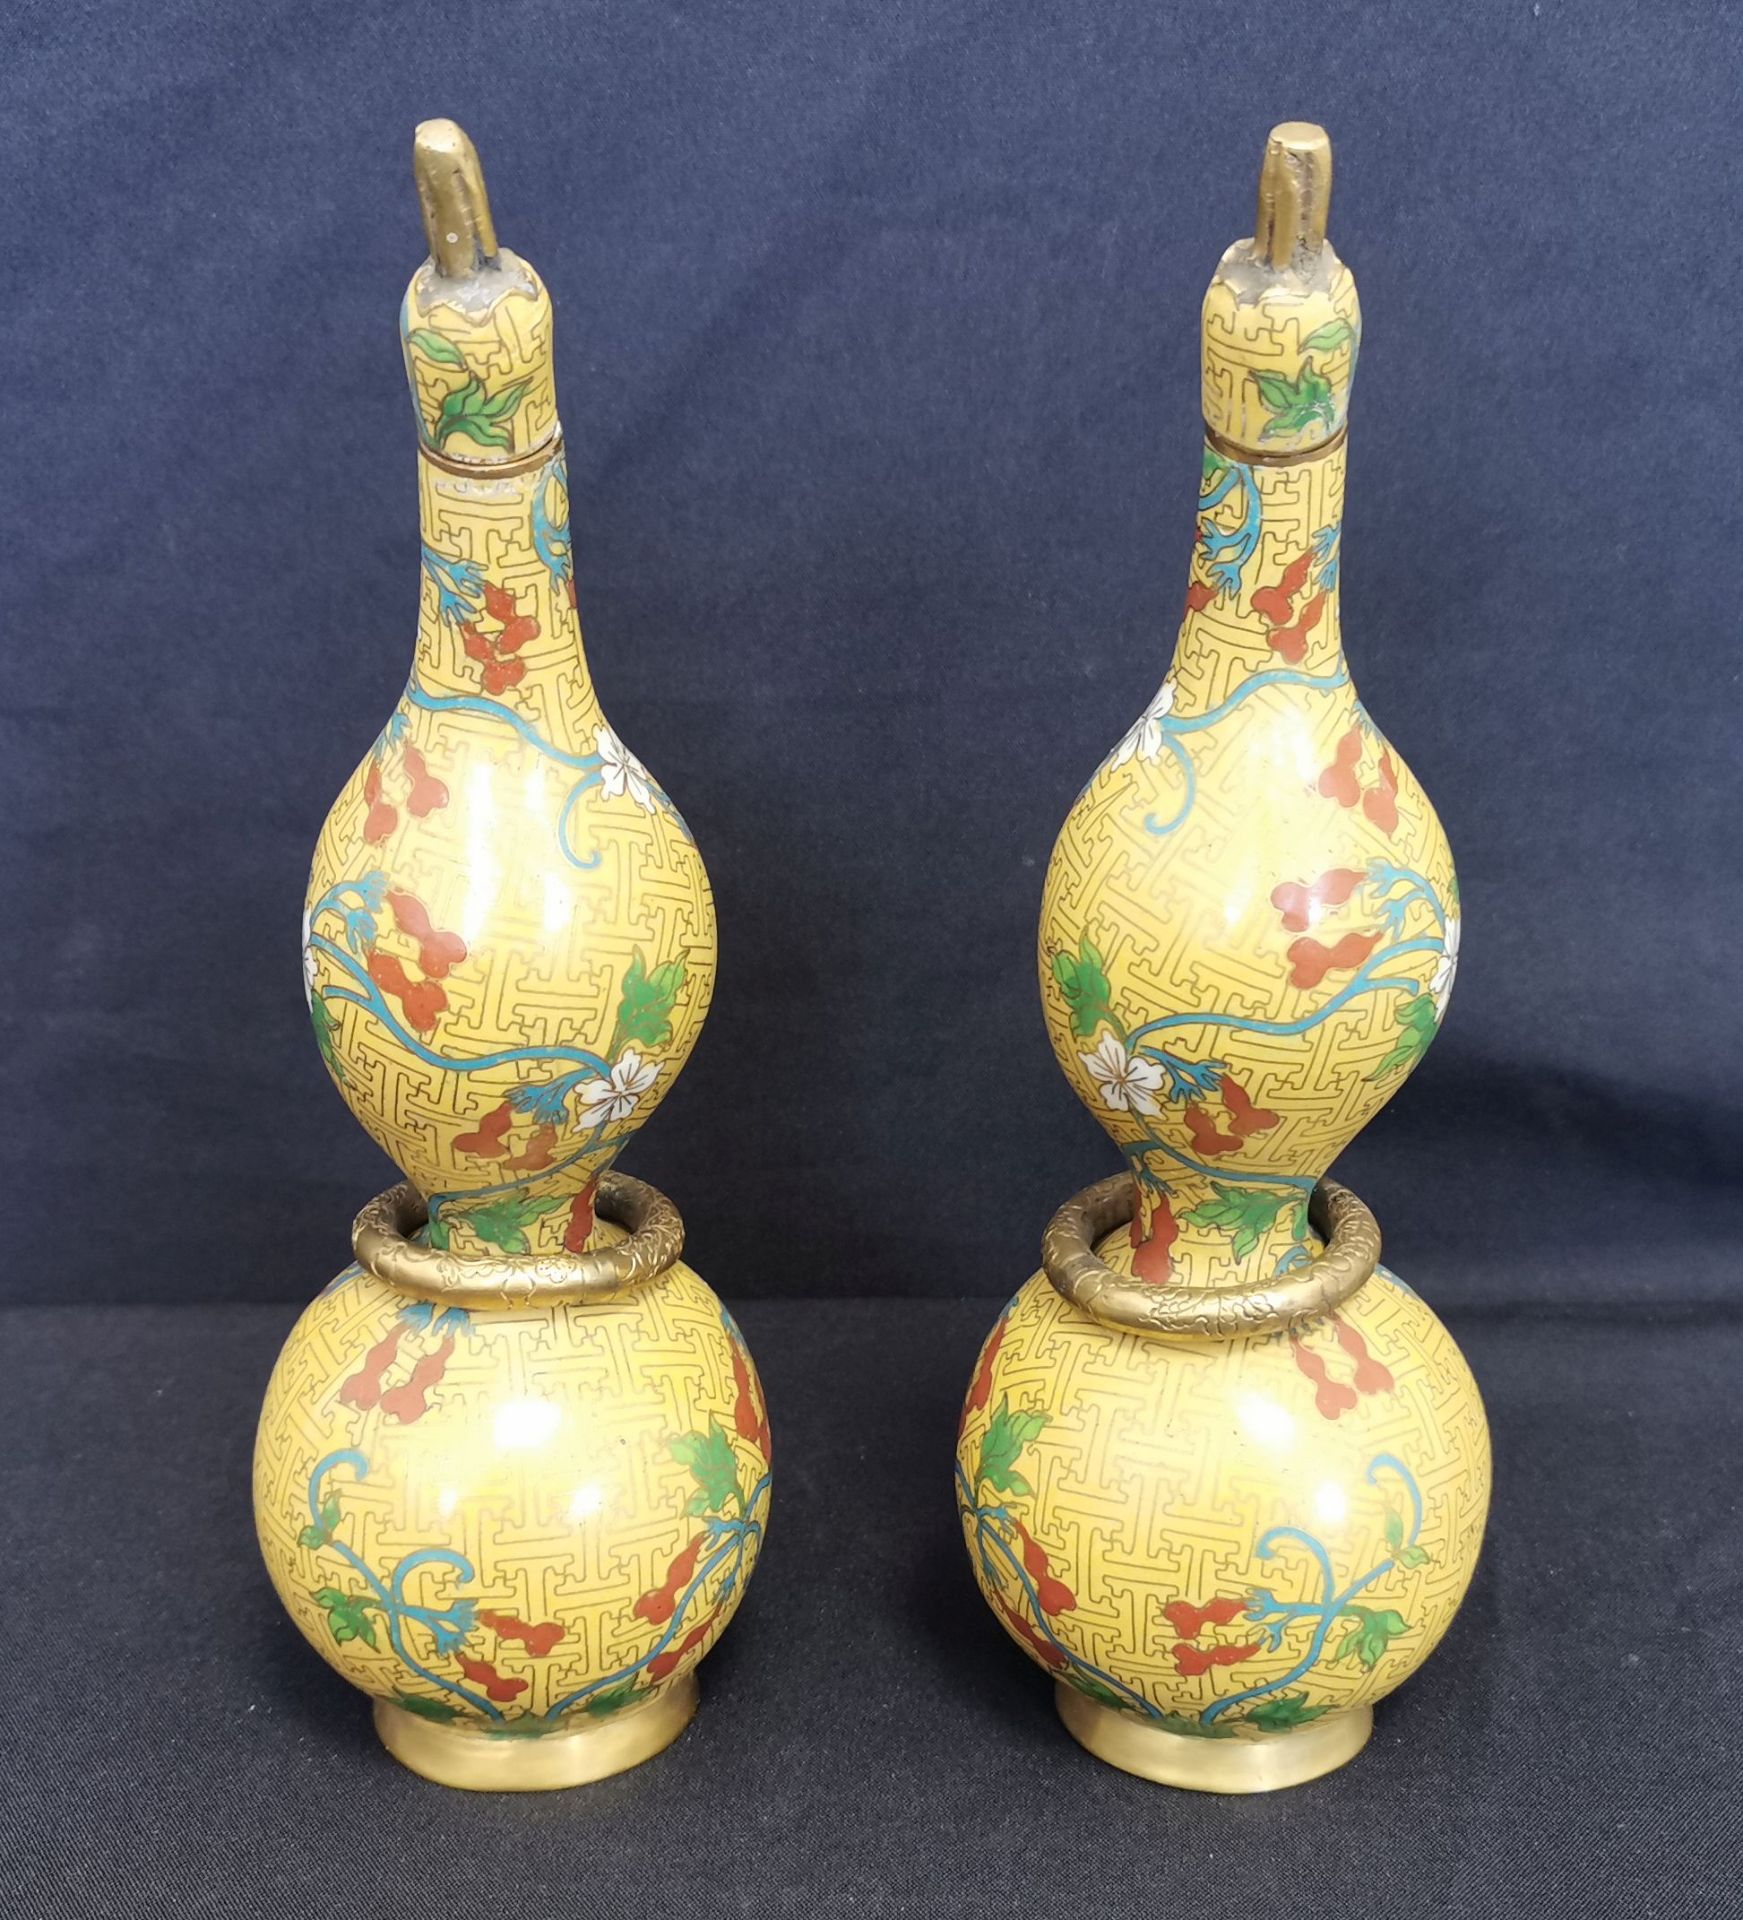 2 CLOISONNE VASES IN THE SHAPE OF A BOTTLE GOURD - Image 3 of 4